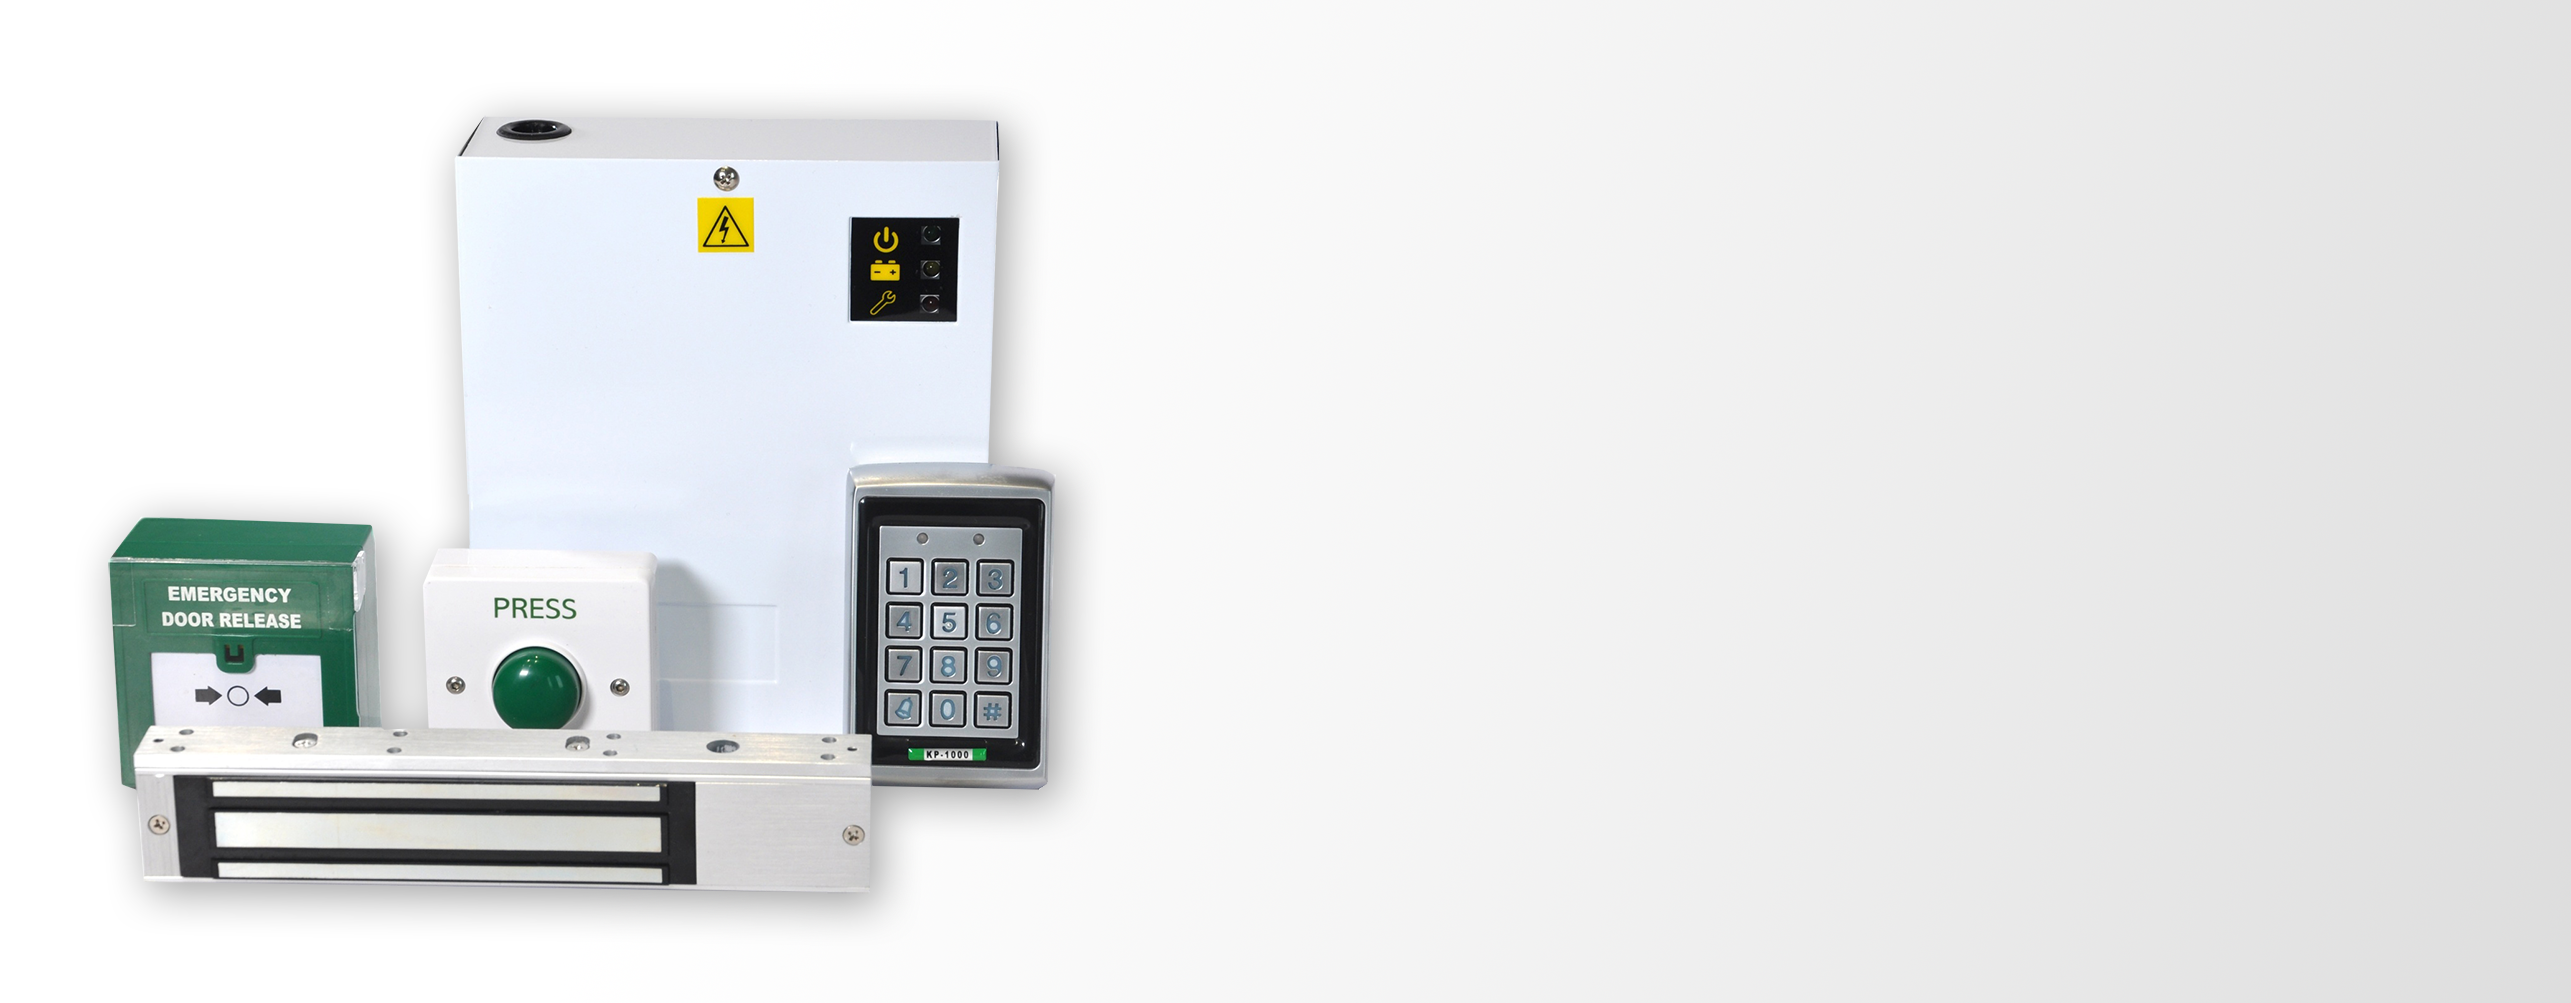 Access control kit image of products with keypad